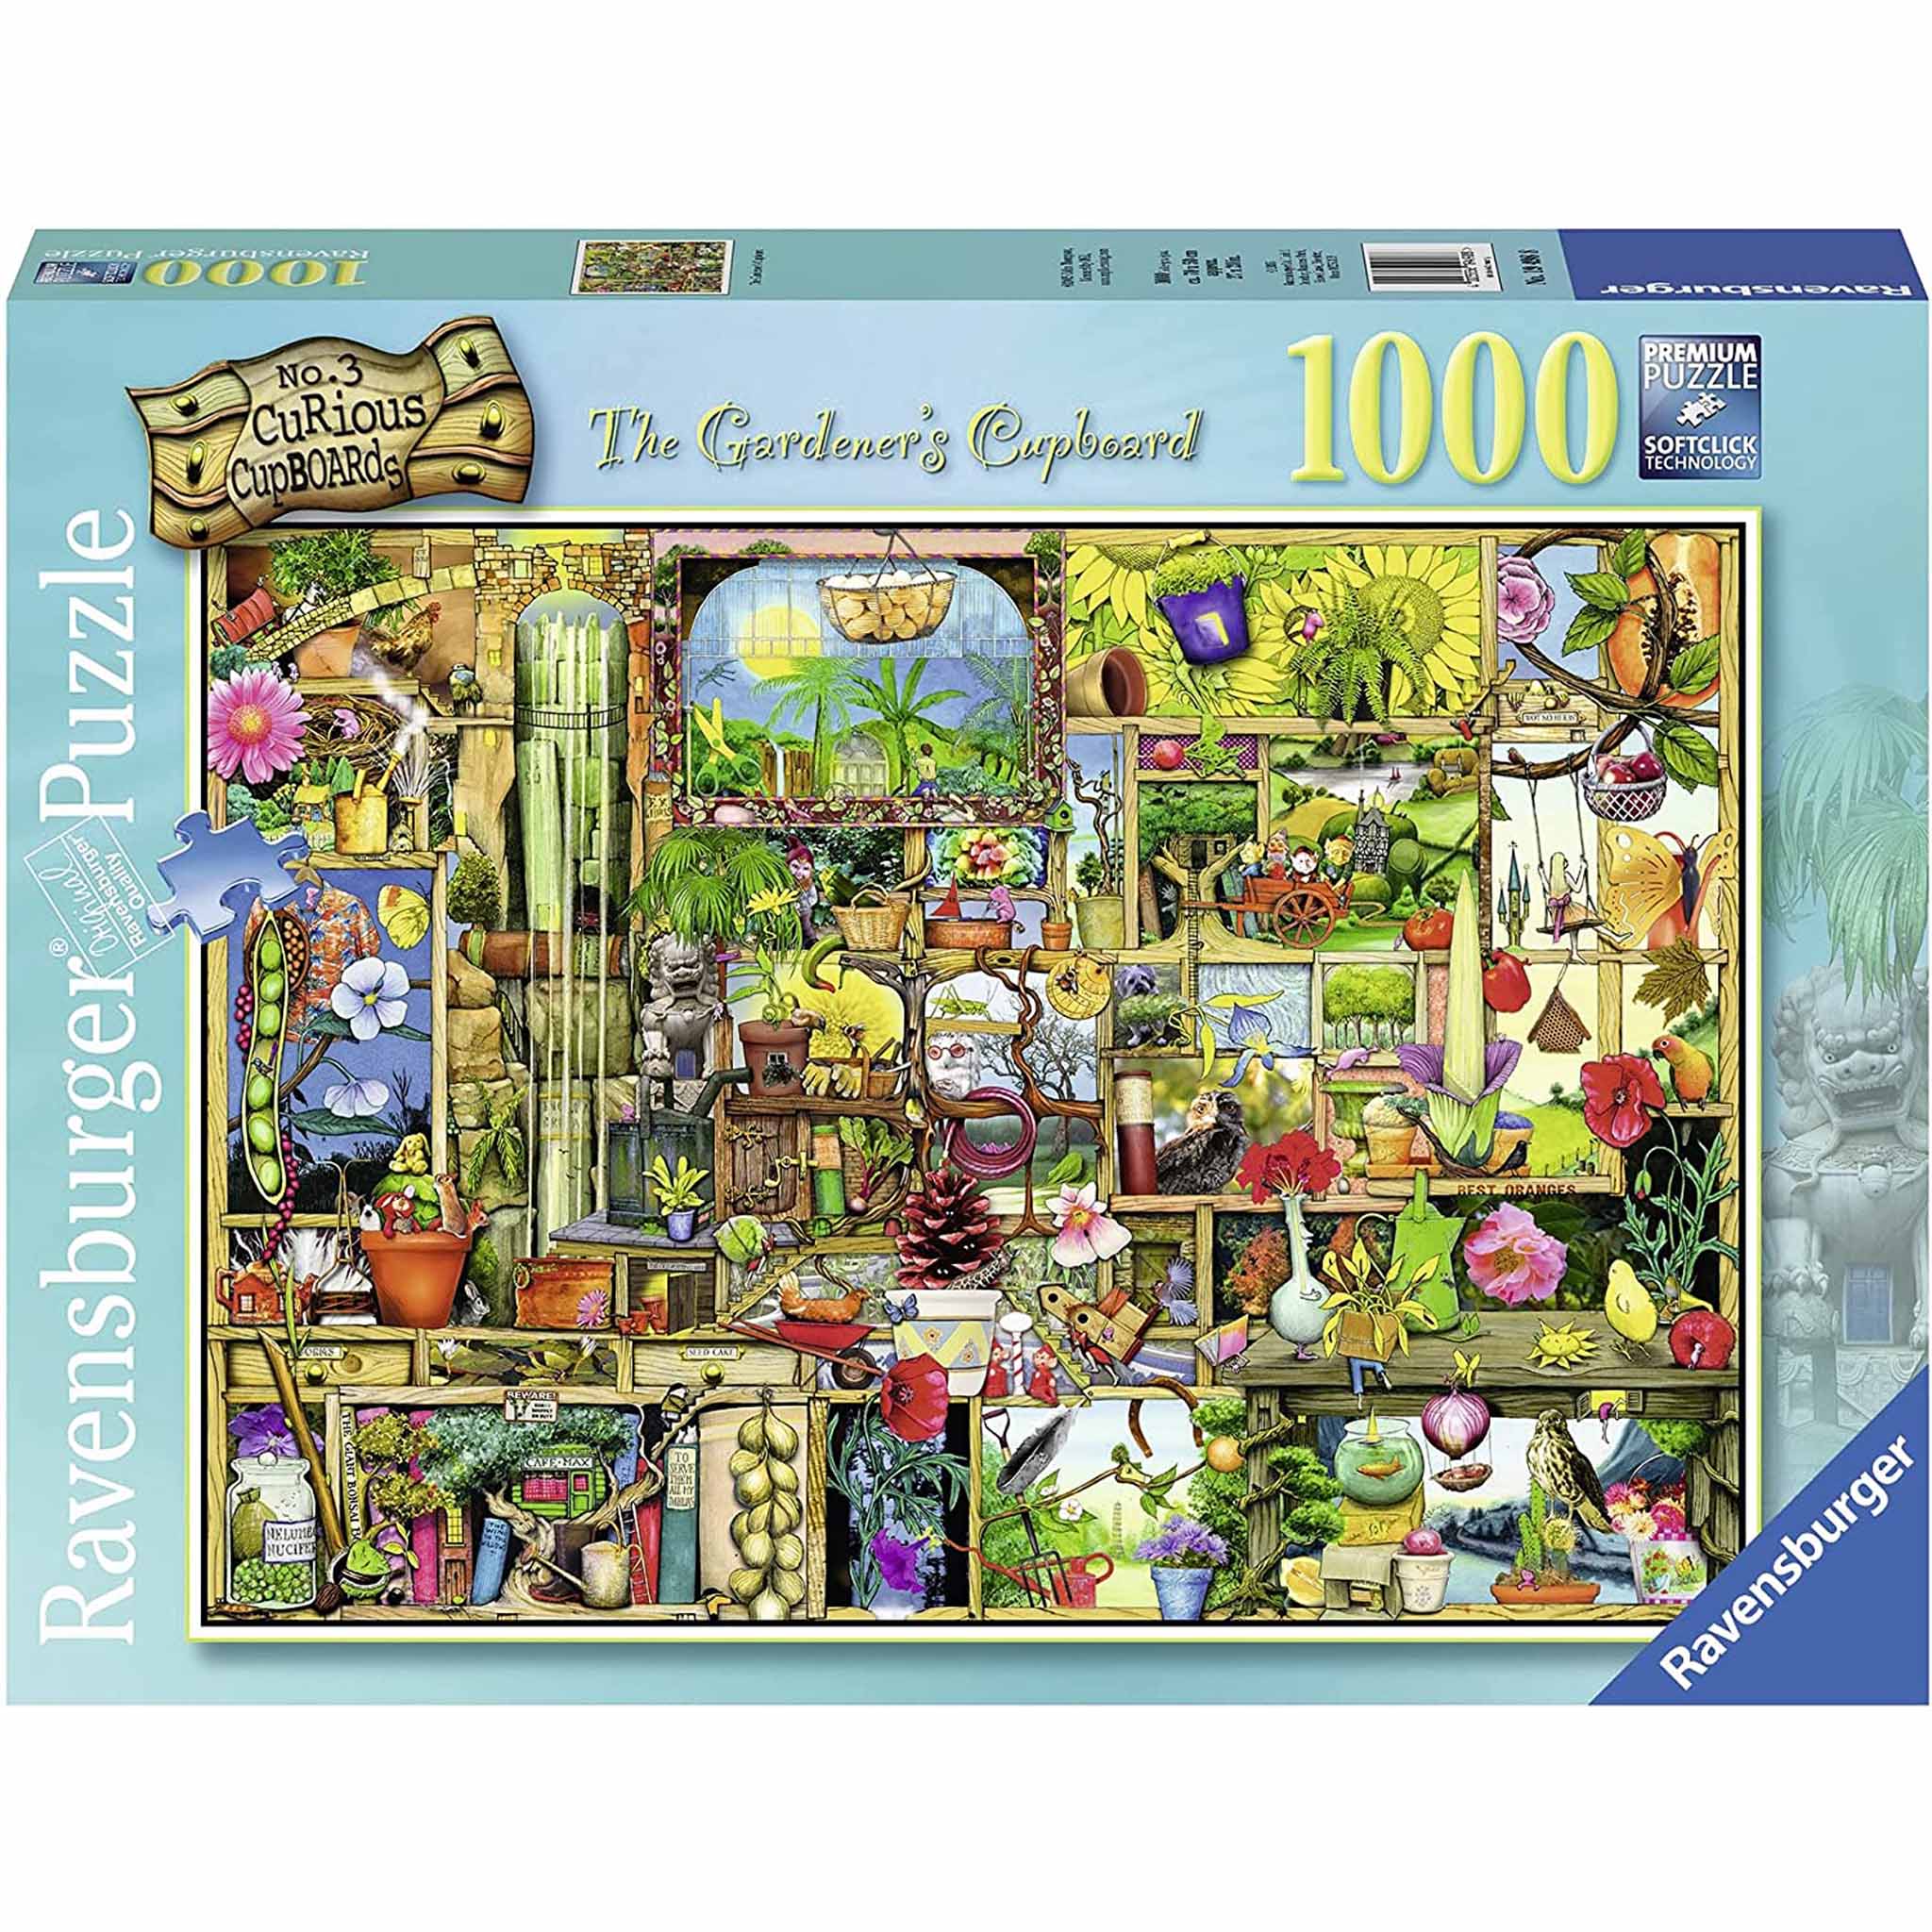 Ravensburger Jigsaw Puzzles with Art by Colin Thompson | Buy or